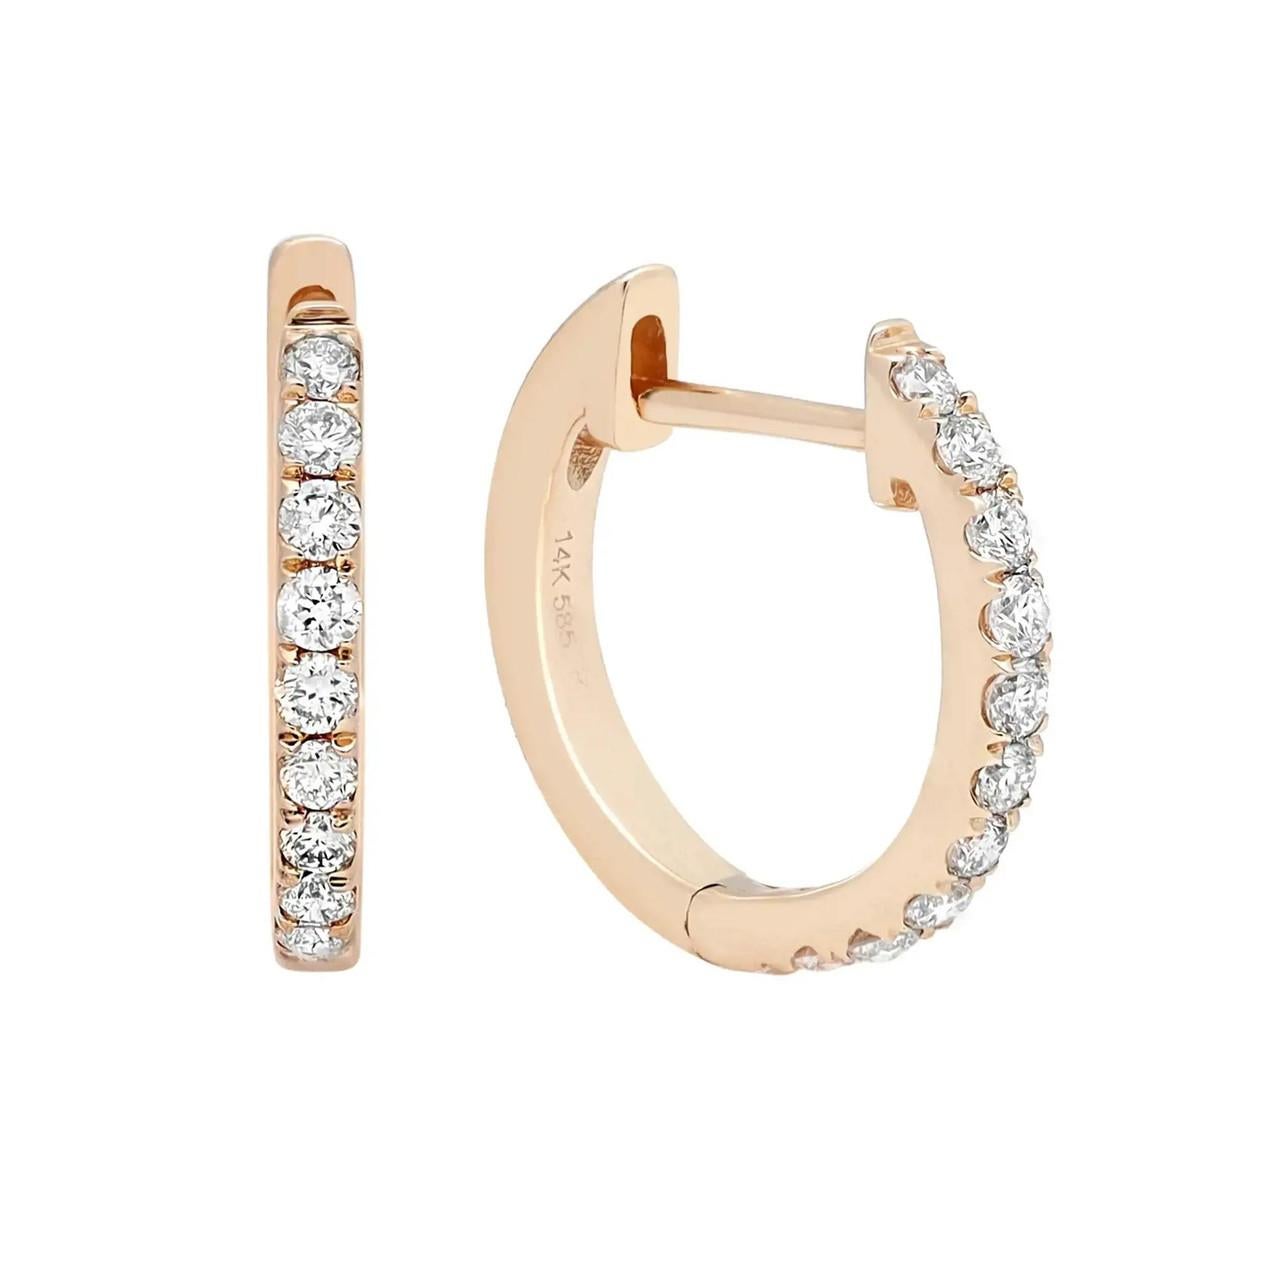 0.20 Carat Round Cut Diamond Huggie Earrings in 14k Yellow Gold In New Condition For Sale In New York, NY